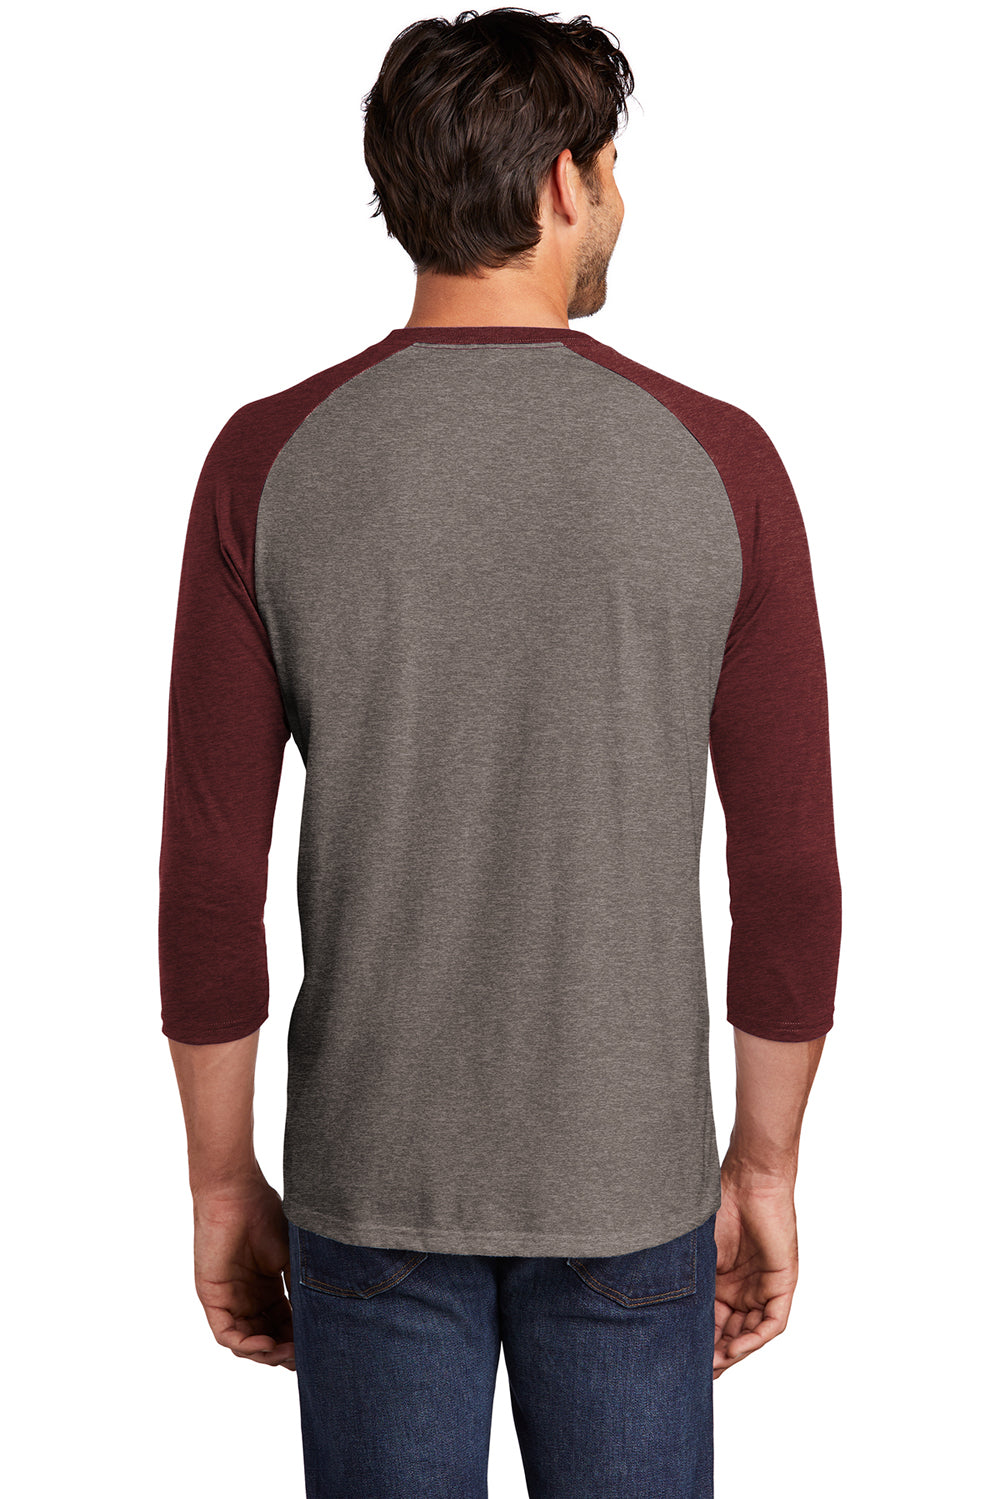 District DM136 Mens Perfect Tri 3/4 Sleeve Crewneck T-Shirt Grey Frost/Maroon Frost Back